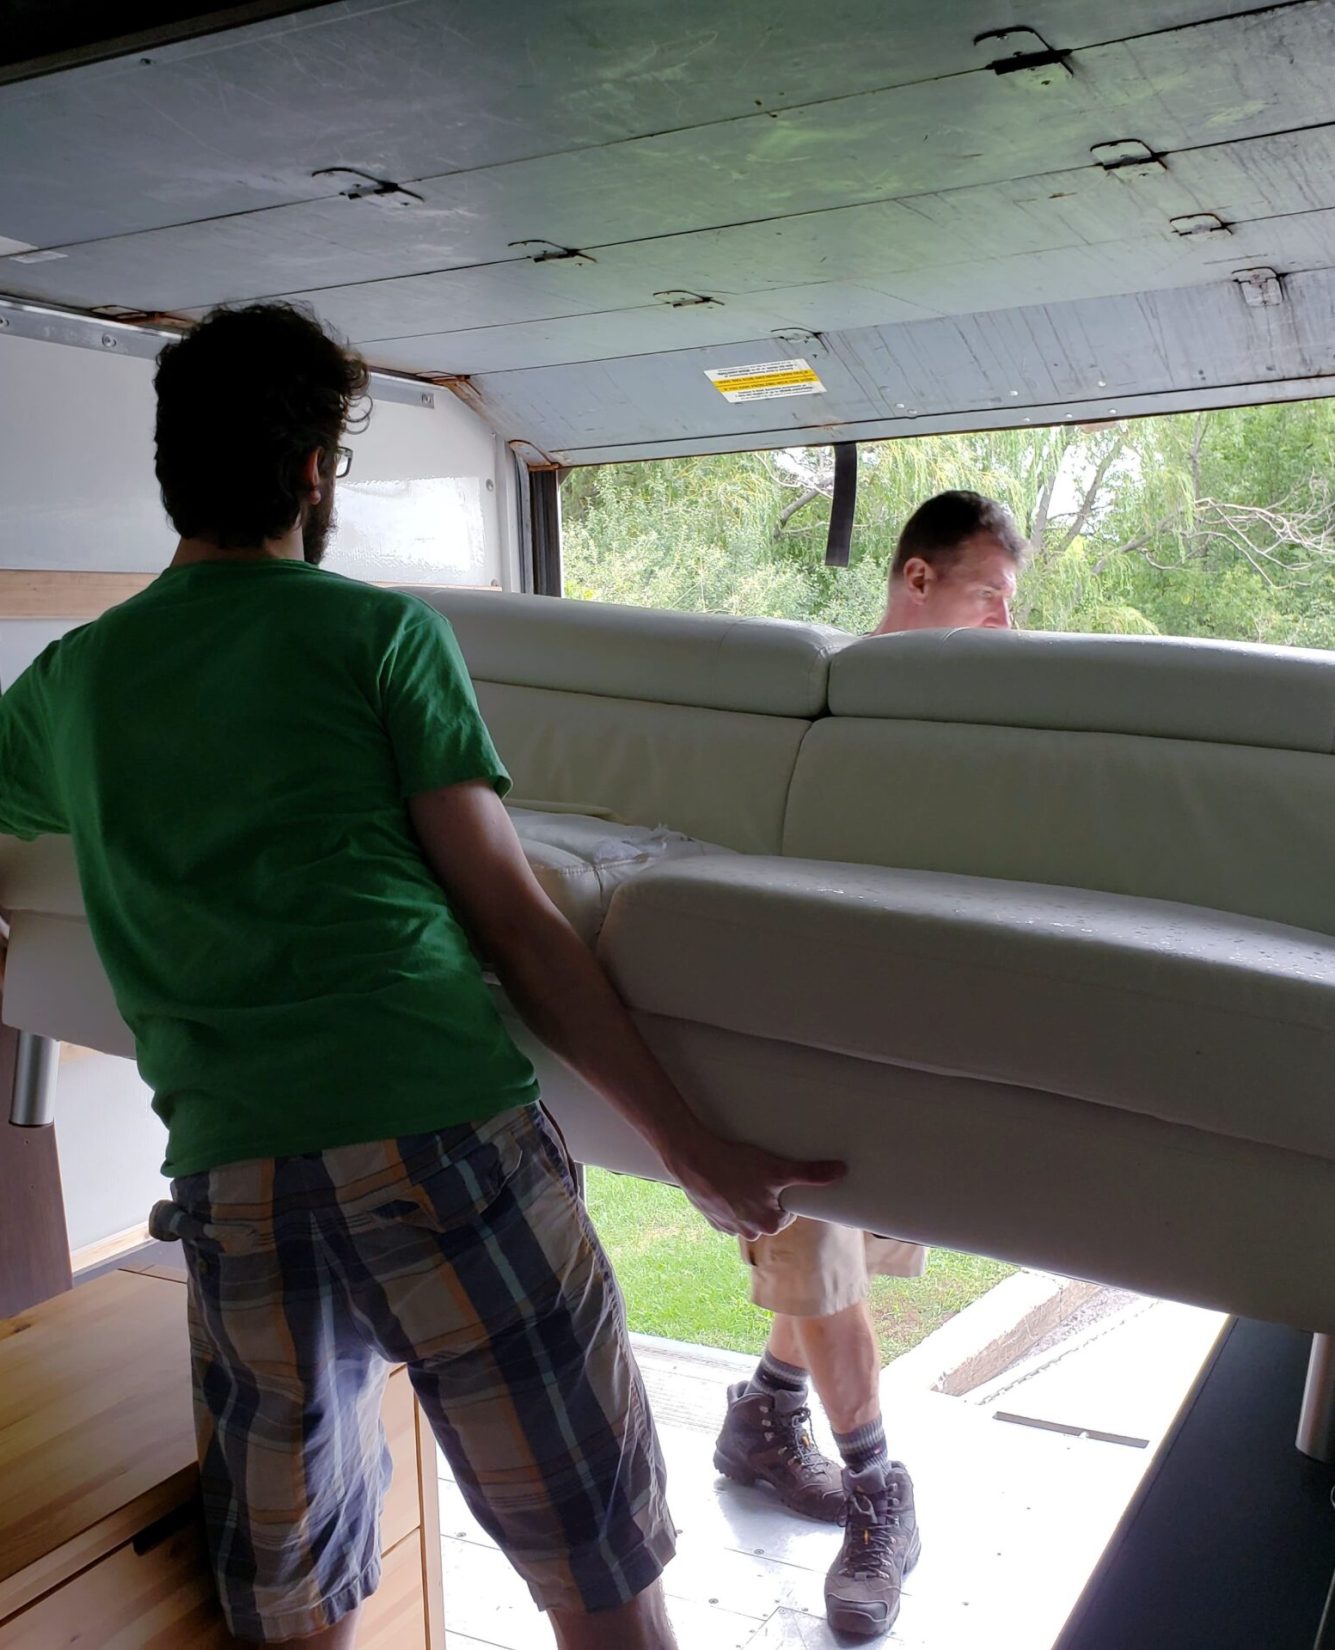 father-and-son-carrying-sofa-from-movers-truck-on-2023-11-27-05-18-58-utc